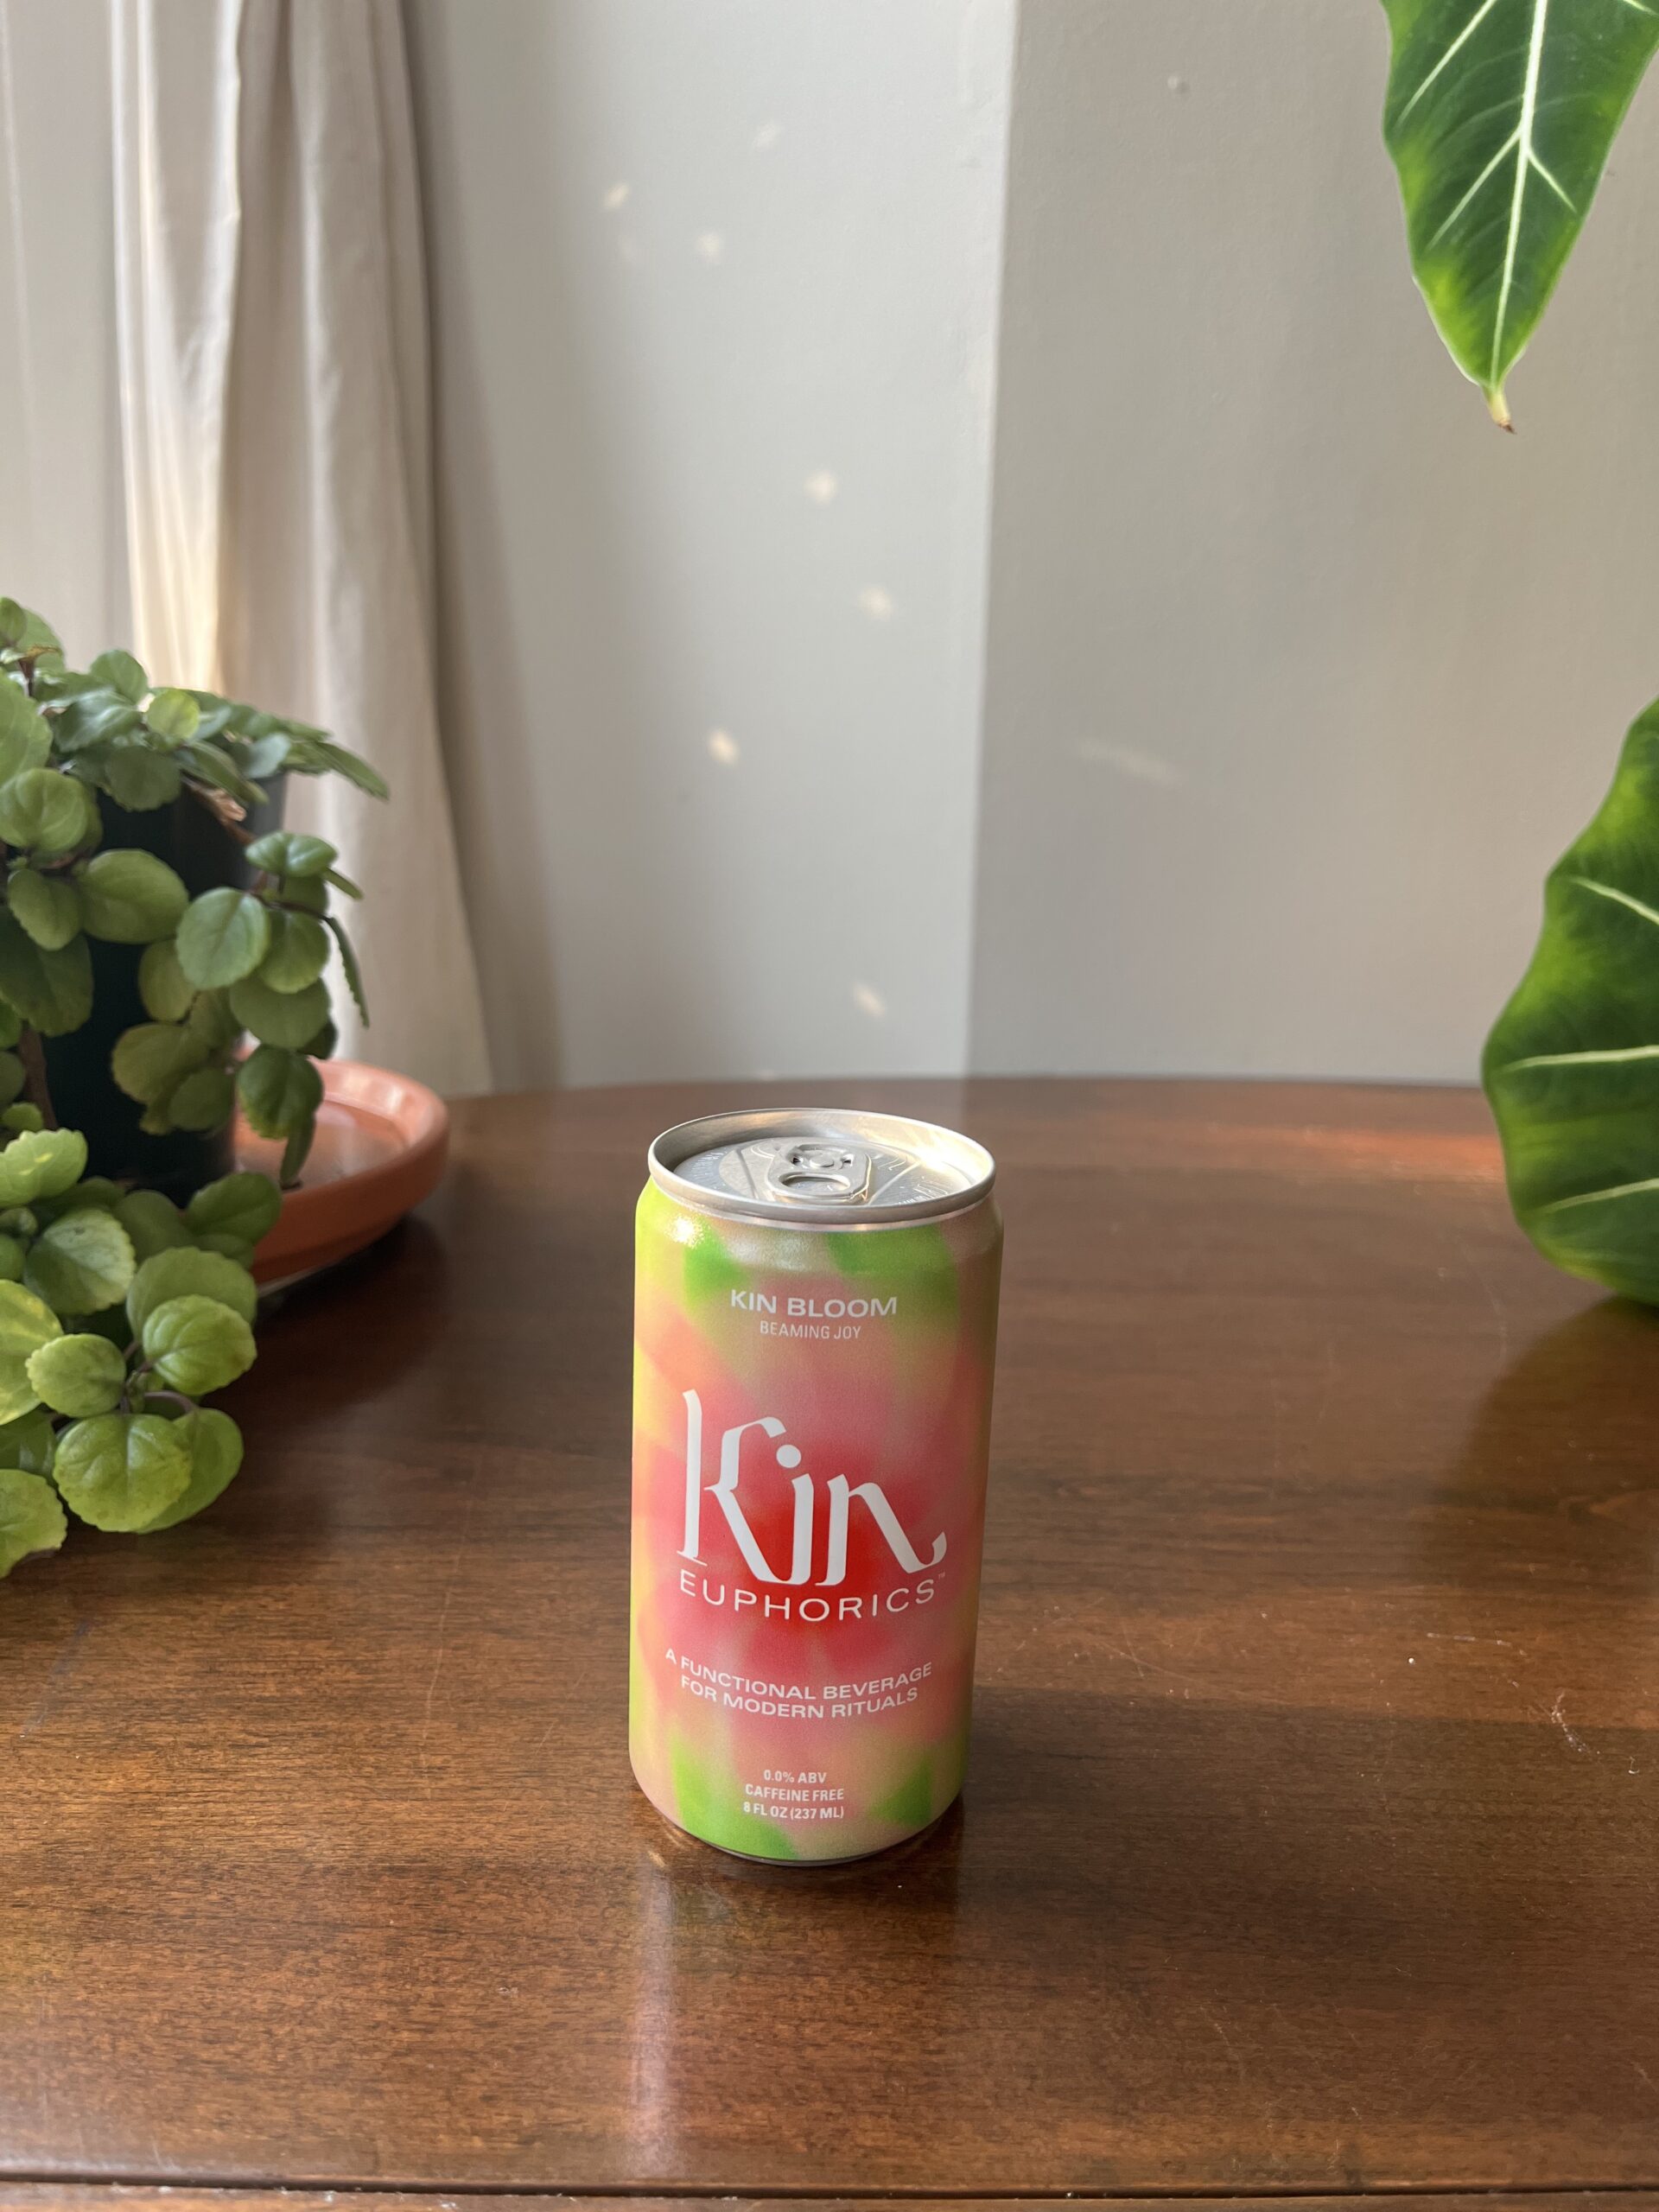 A can of Kin Euphorics non-alcoholic beverage sits on a wooden table. It is pink and green colored with text on the front. Plants in white pots are in the background.